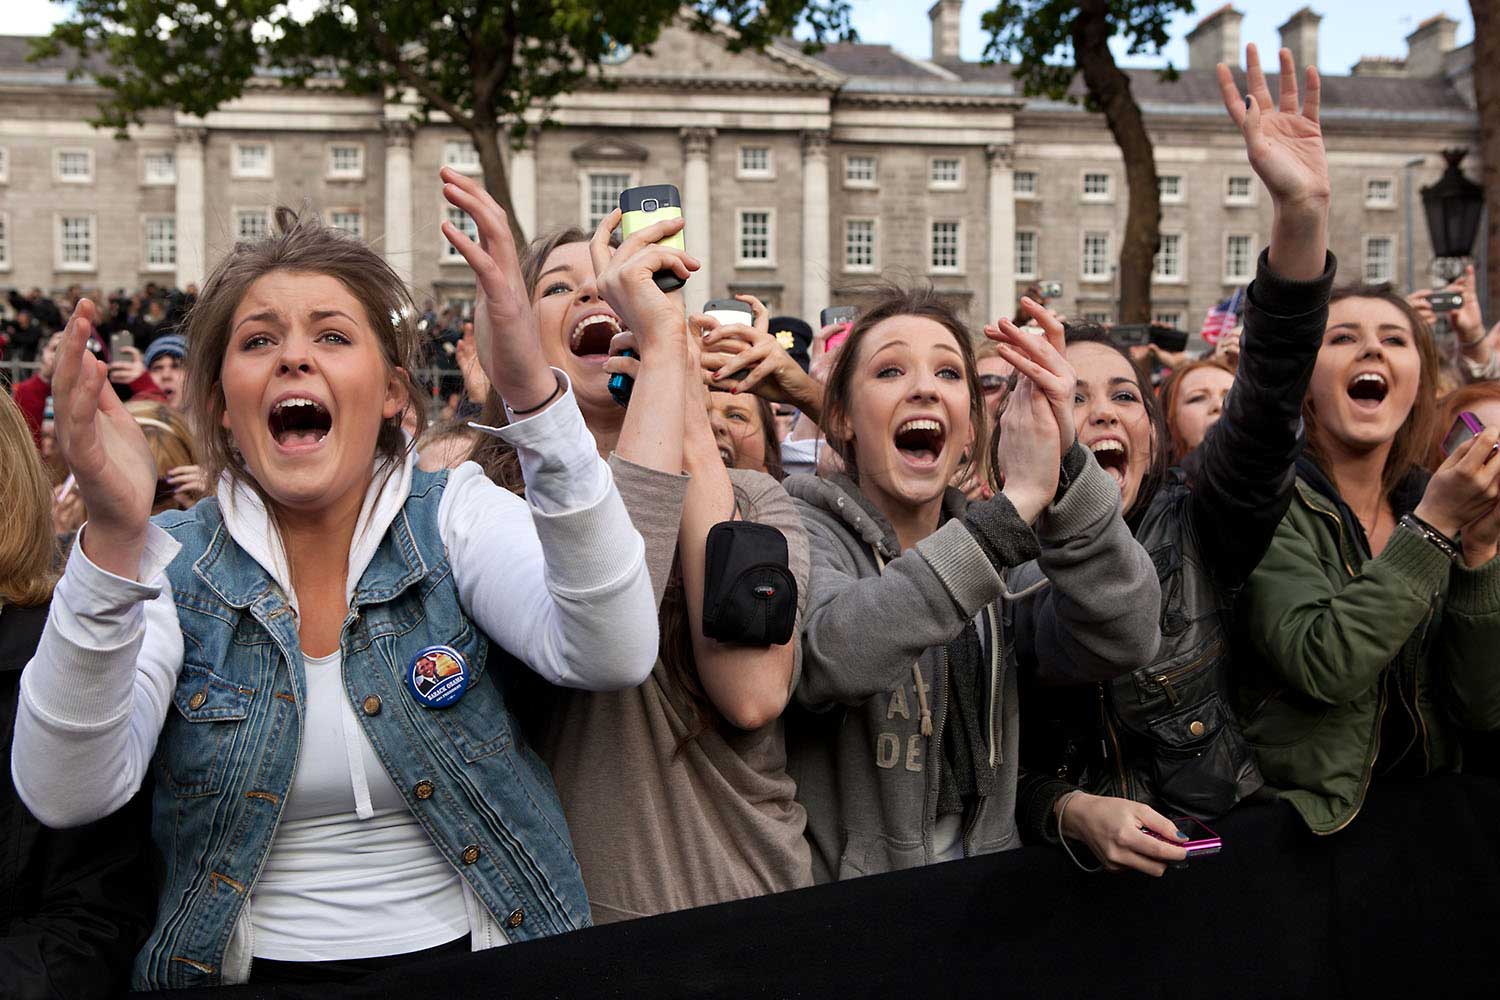 "I can still hear these Irish girls screaming, 'Barack! Barack! Michelle! Michelle!' It reminded me of the old black and white video footage of American girls screaming at the Beatles in concert. These girls were cheering as the President and First Lady took the stage at the College Green in Dublin, Ireland, May 23, 2011."